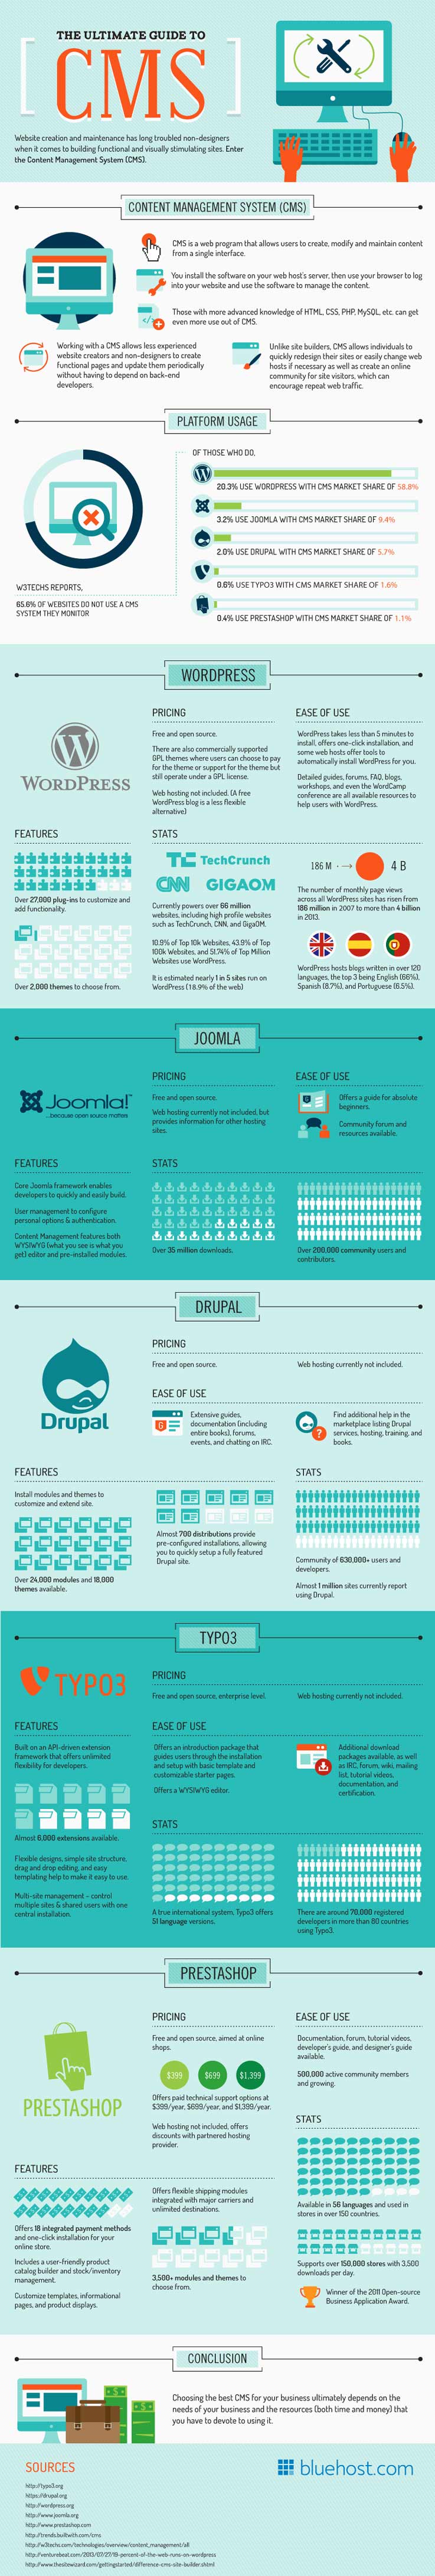 the-ultimate-guide-to-CMS-infographic